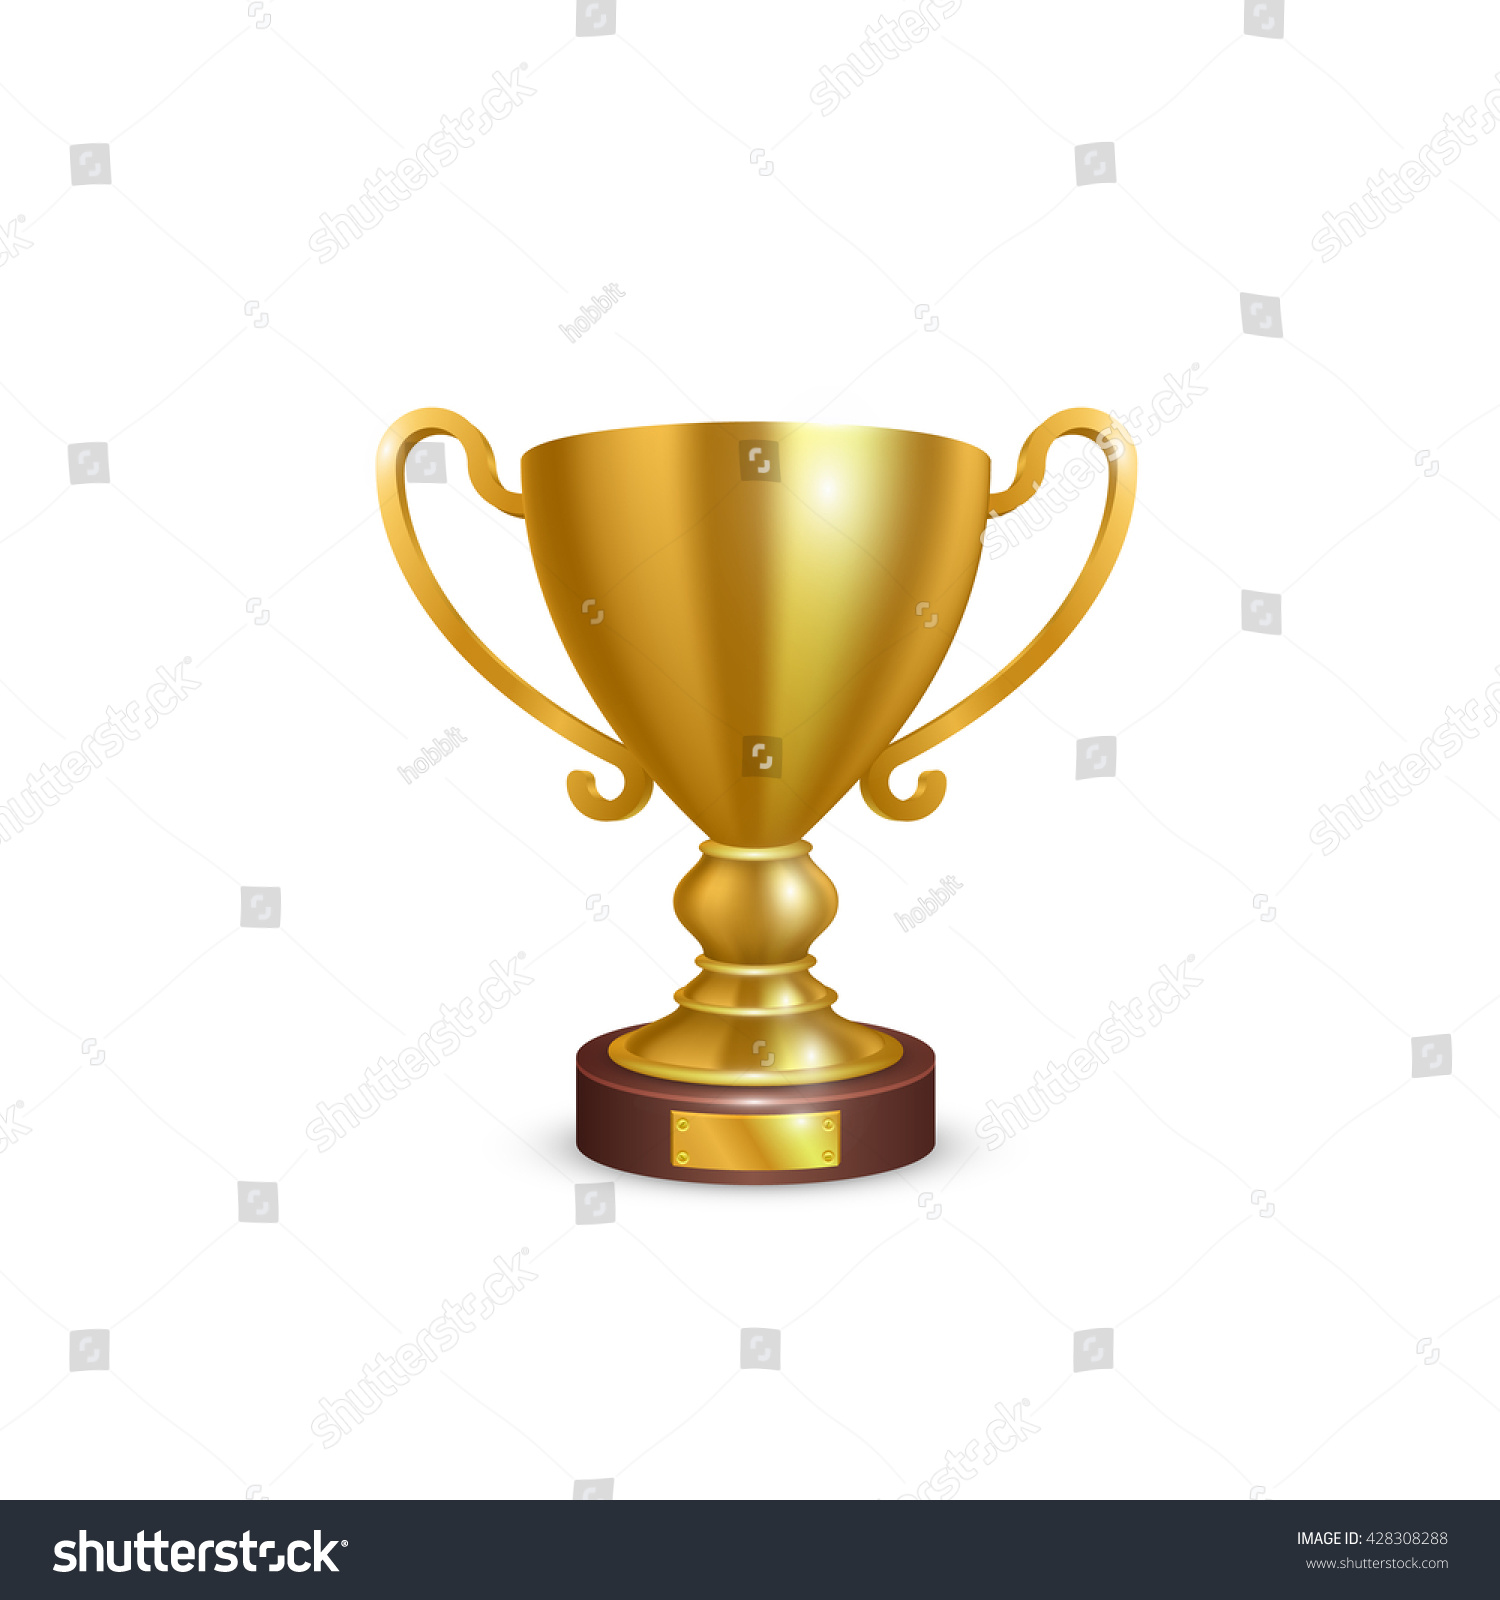 Cup 3d golden leader icon, Object on a white background, Vector illustration #428308288